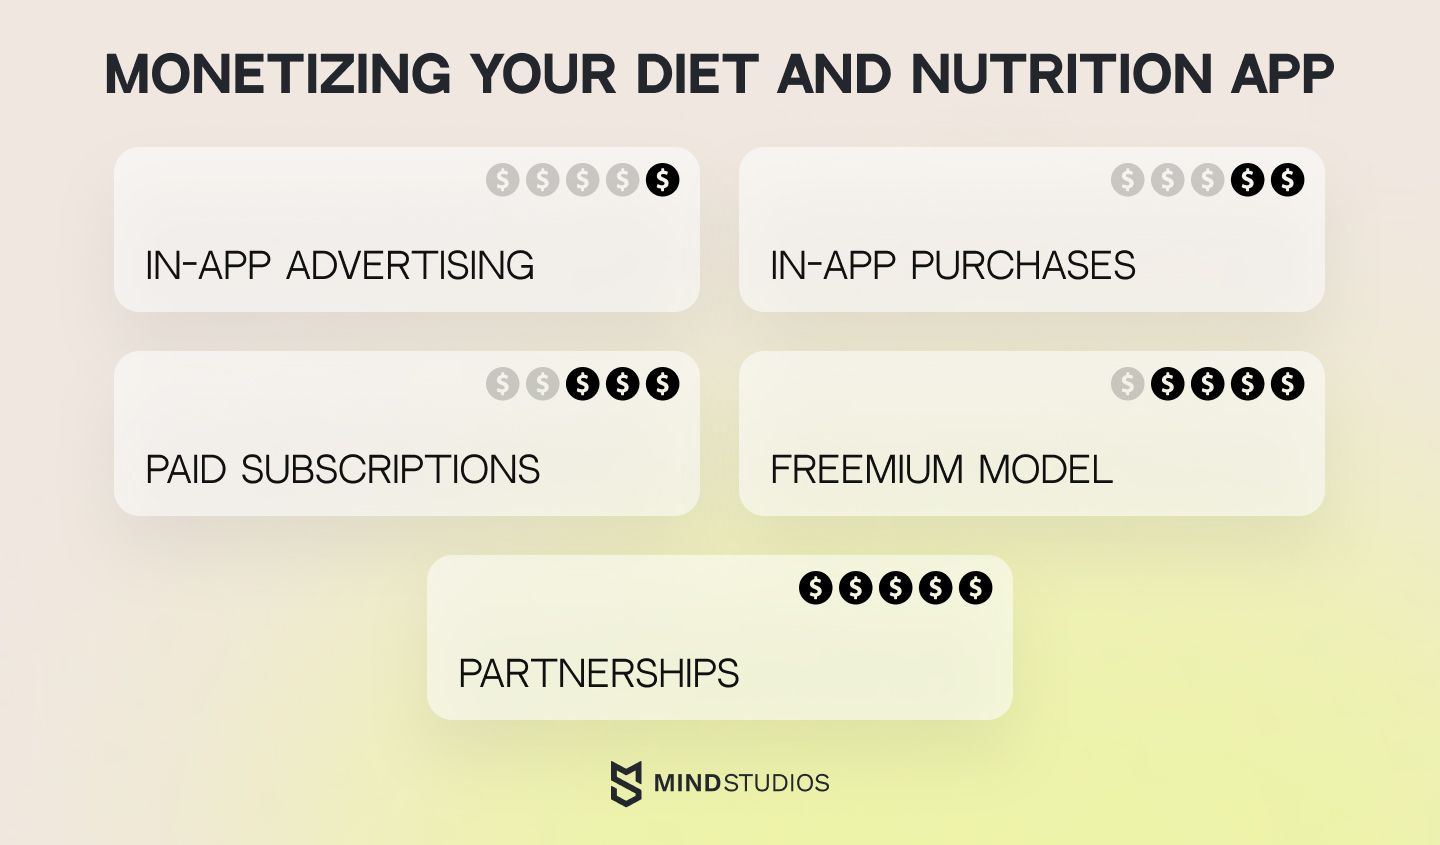 Monetizing your diet and nutrition app